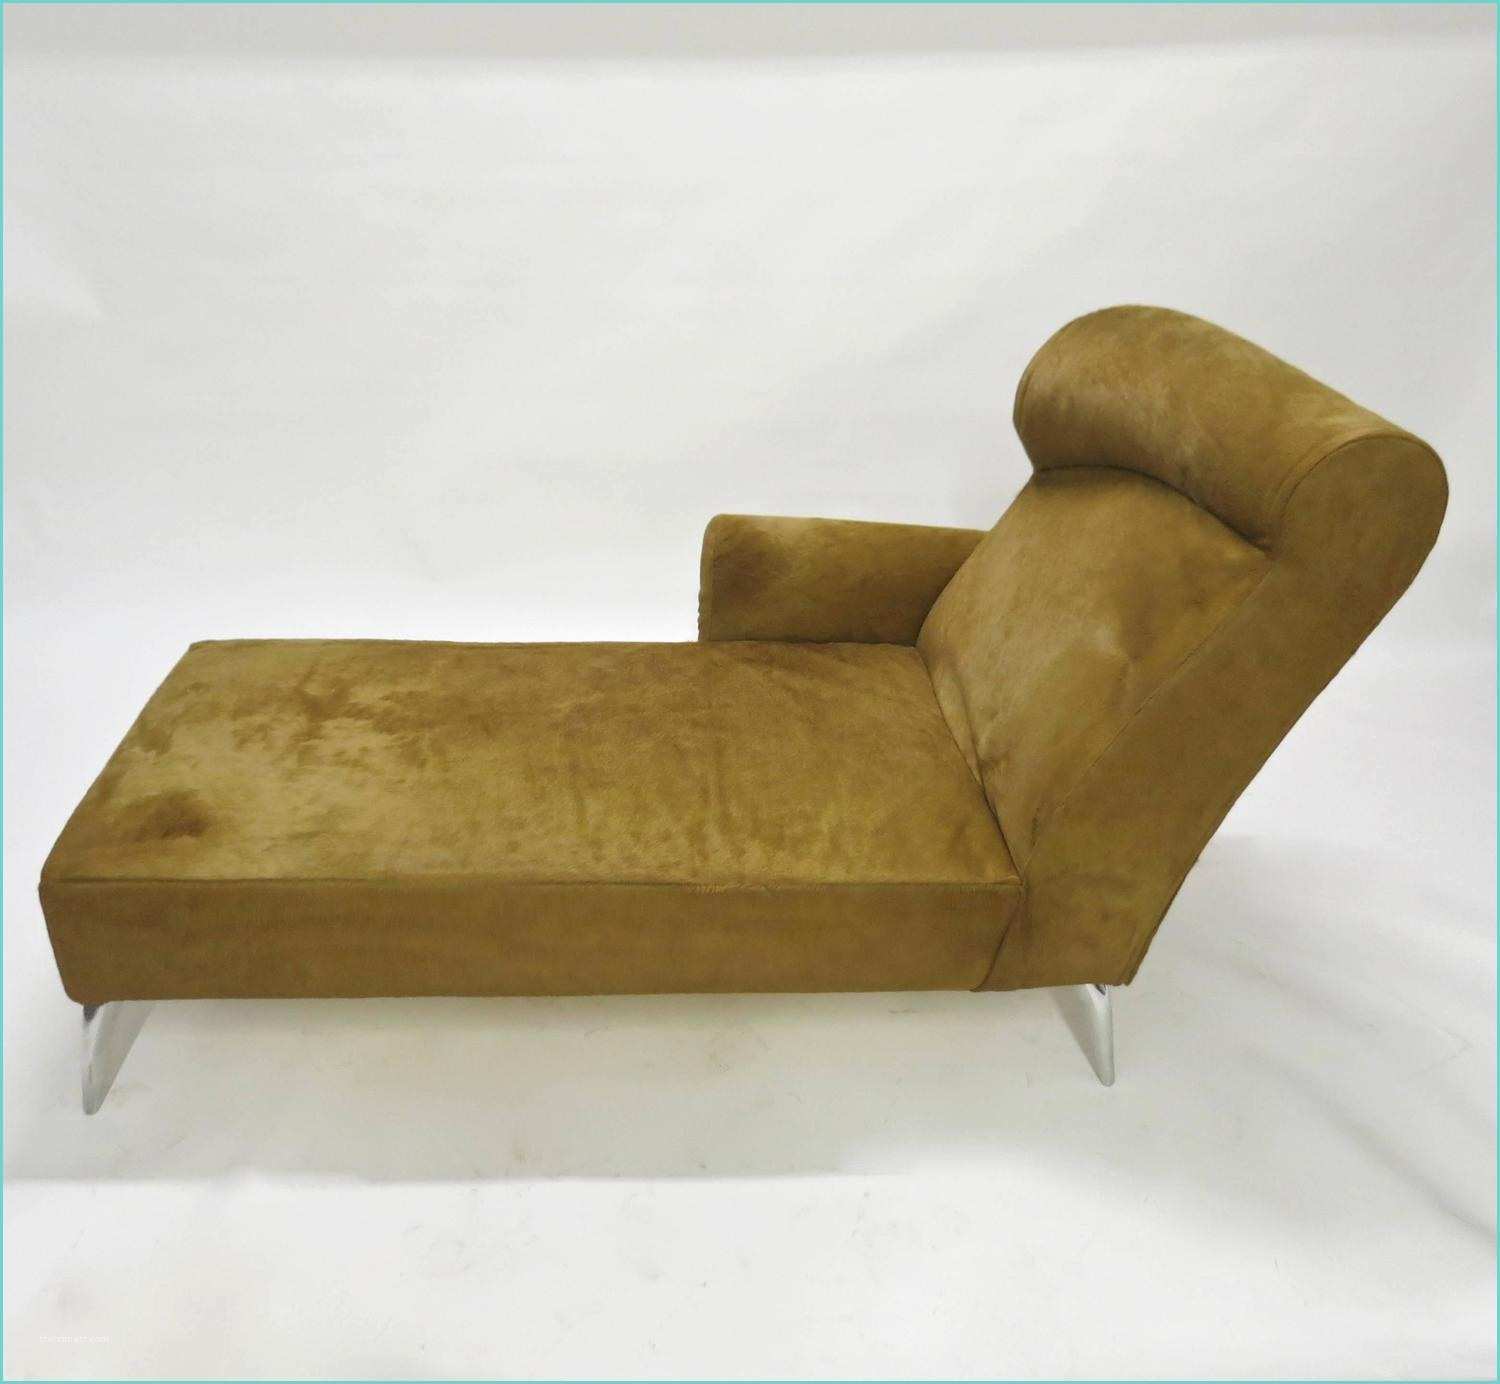 Chaise Longue Philippe Starck Chaise Longue In Cowhide by Philippe Starck for Driade